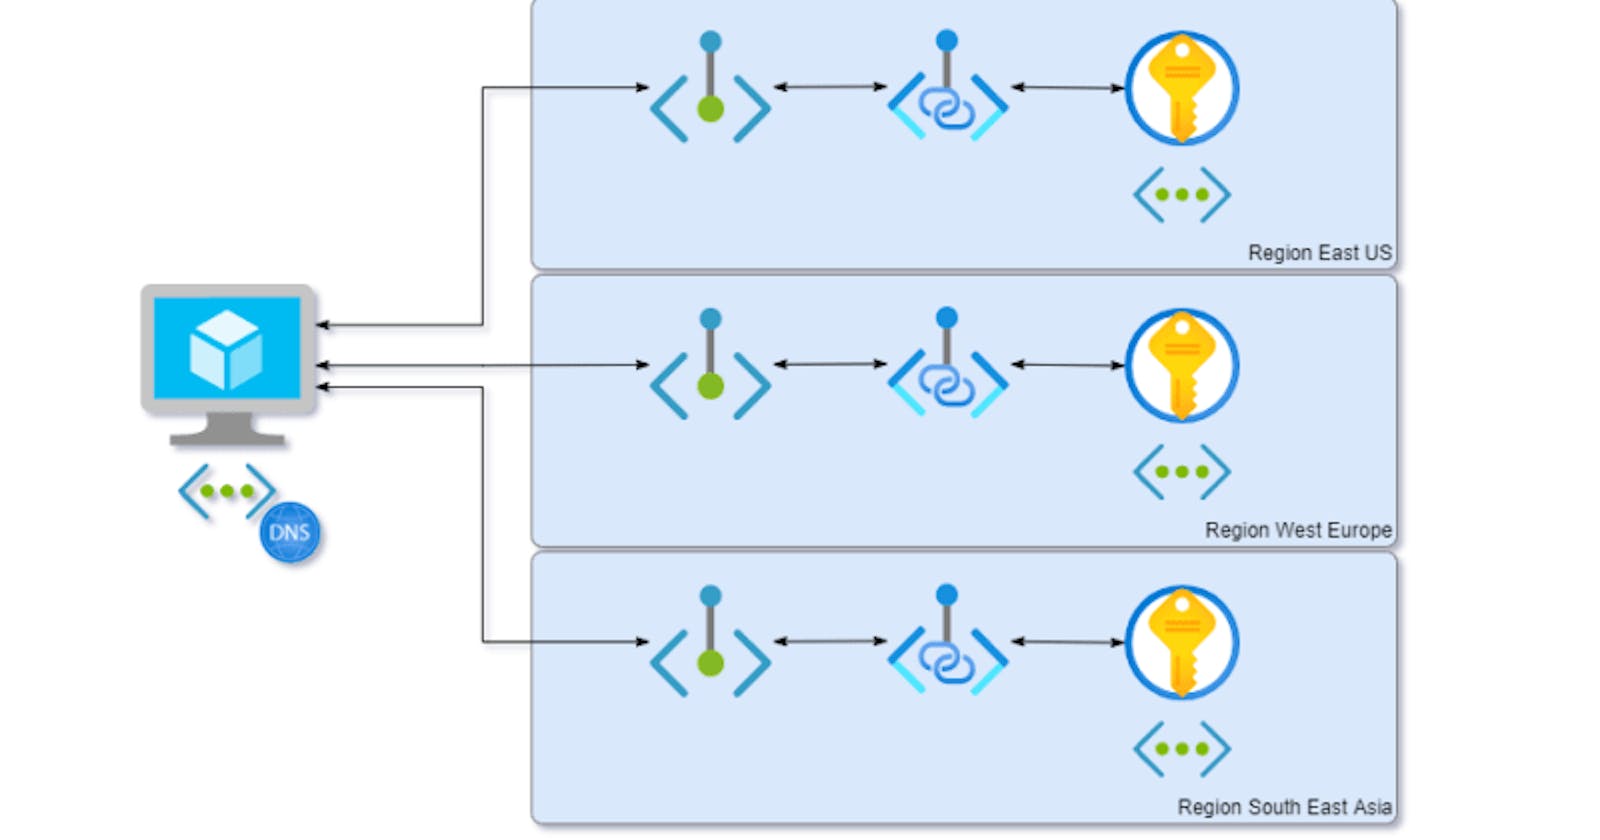 Private linking resources from inside an Azure VM to multiple regional networks